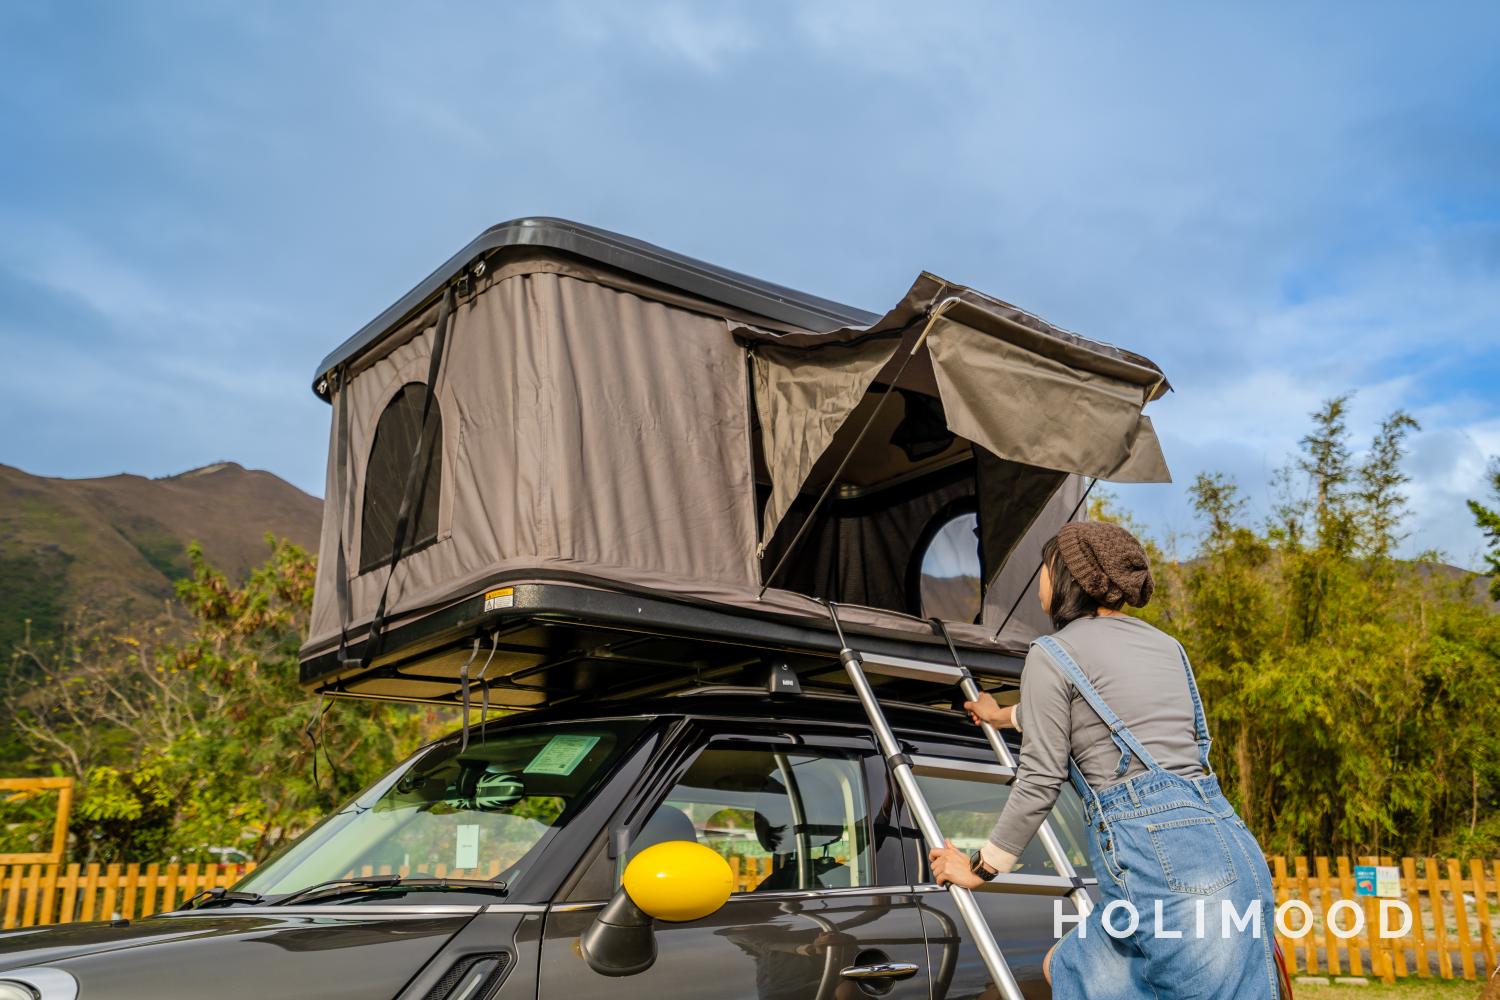 DNA 租車 【Girl Dream Car】Mini Cooper Countryman Roof Camping and Car Camping Experience 6